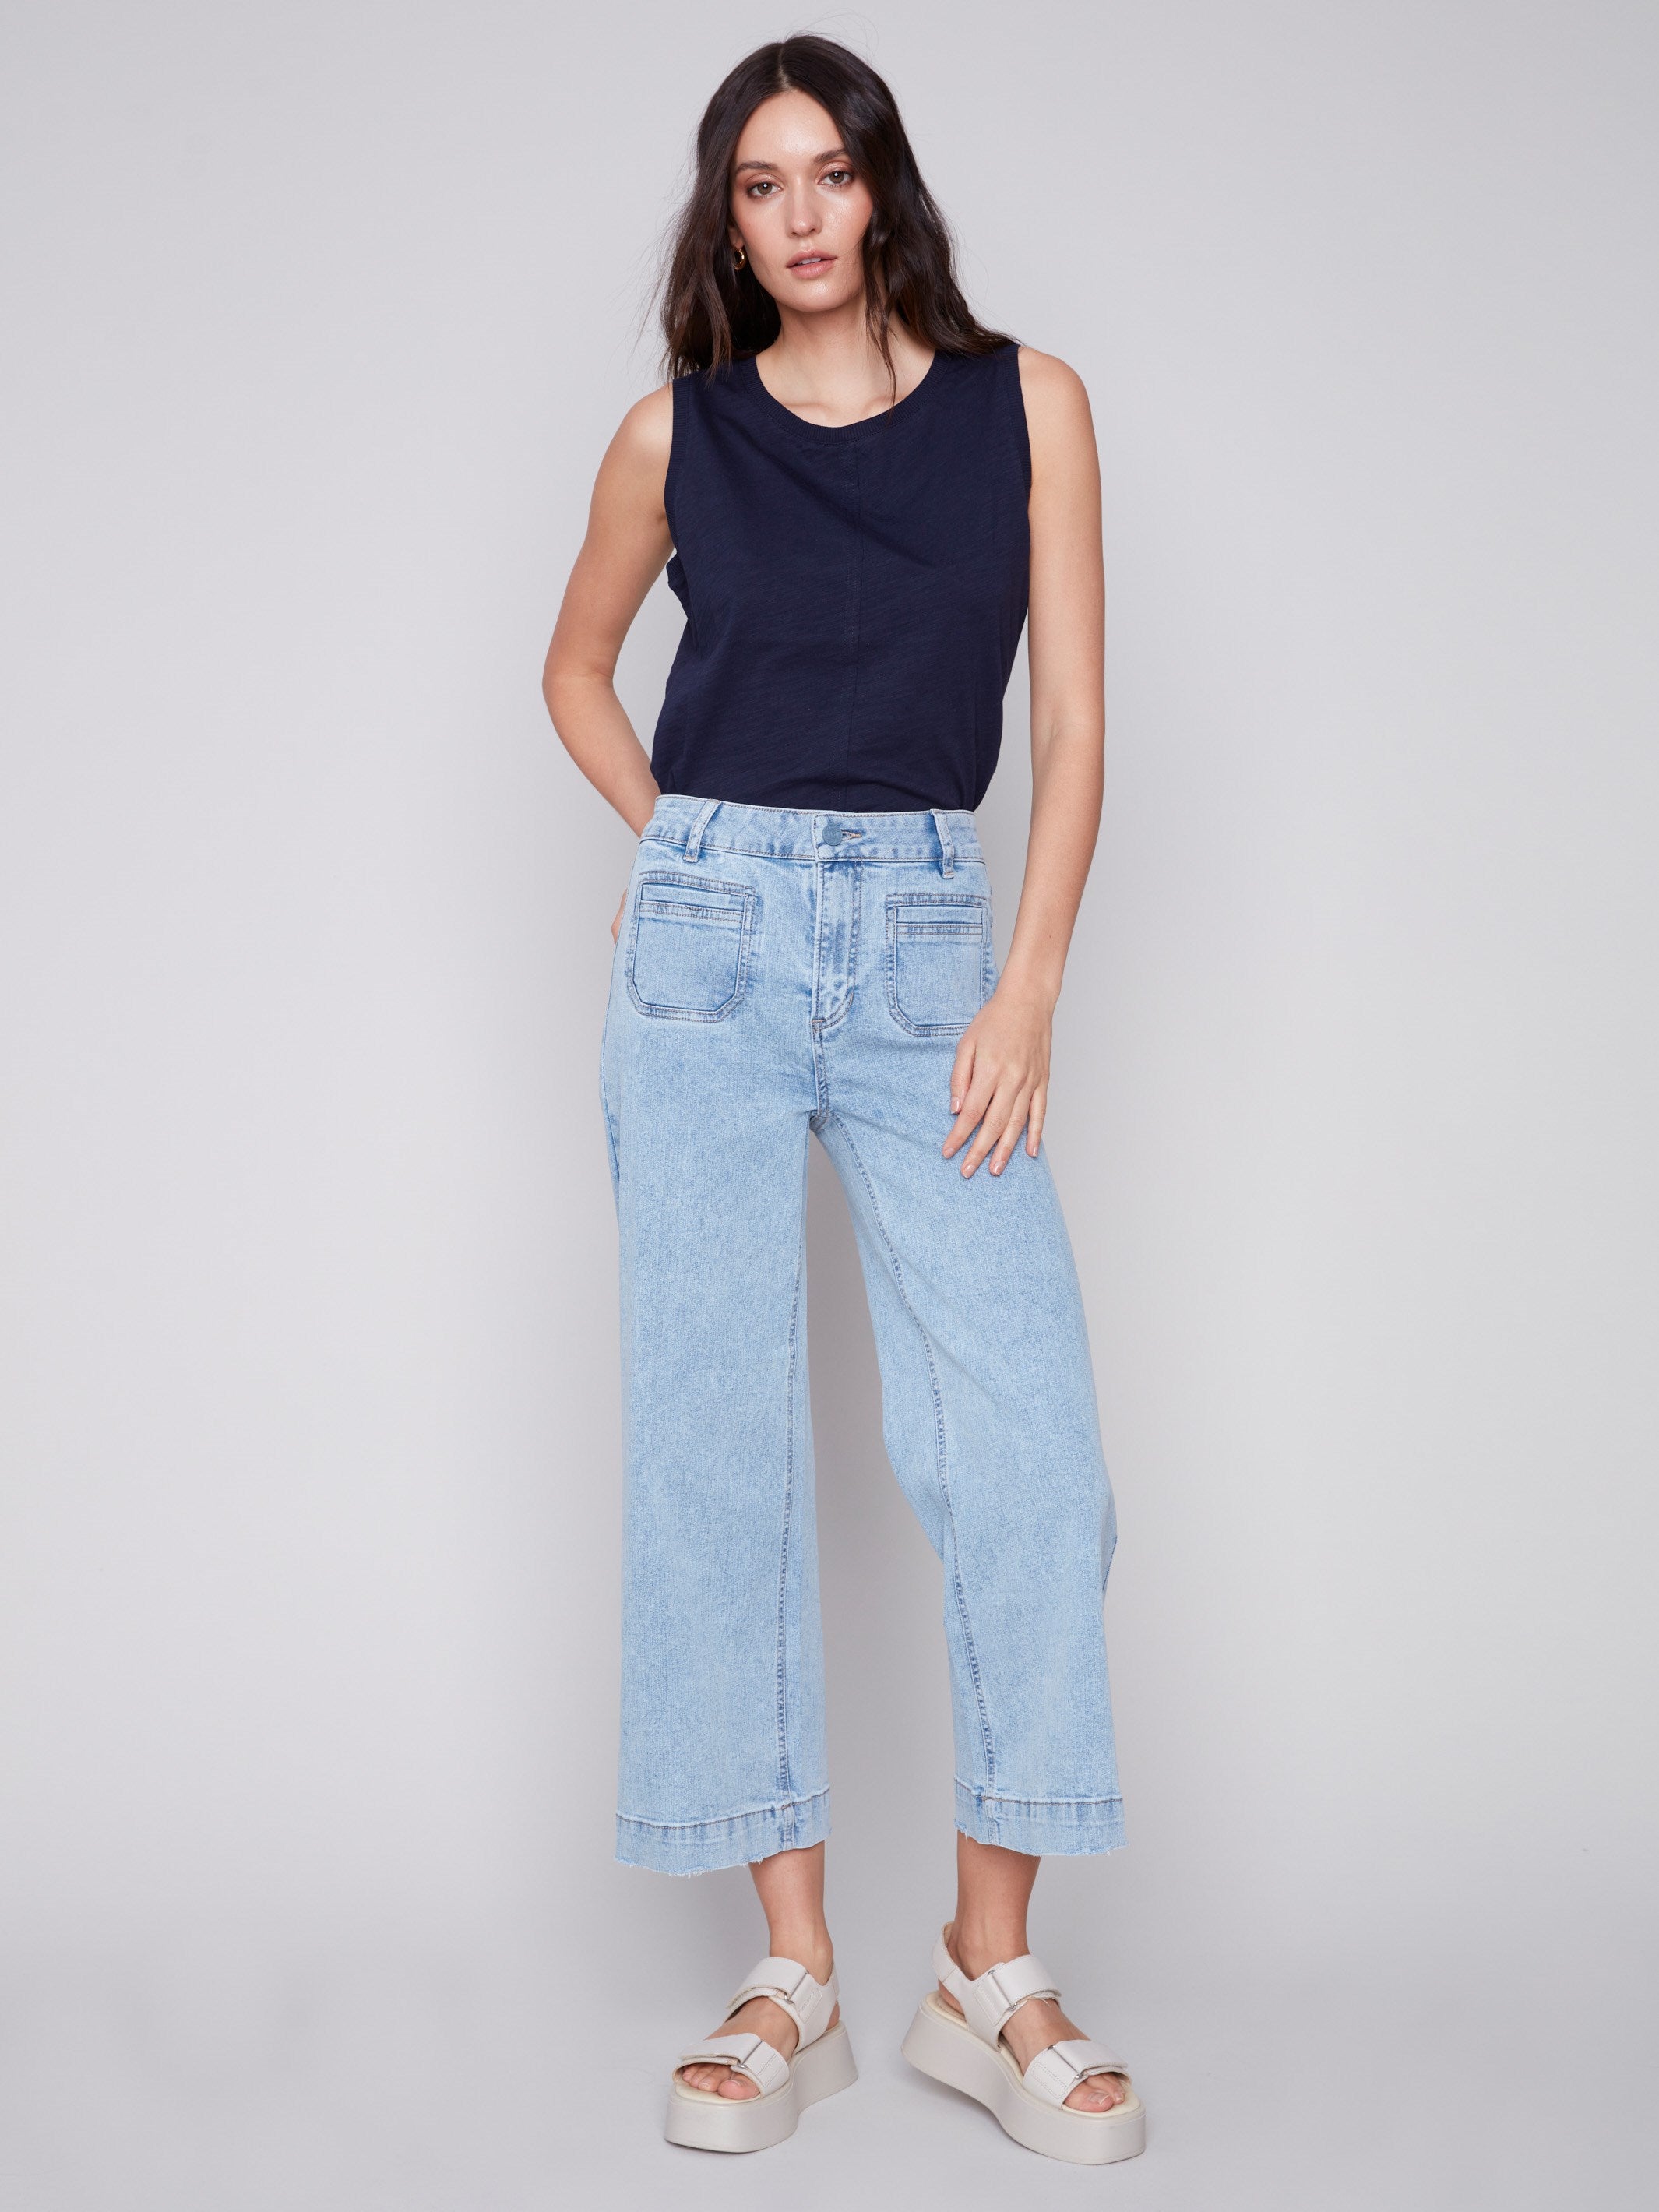 Cropped Wide Leg Jeans - Blue Jean - Charlie B Collection Canada - Image 1